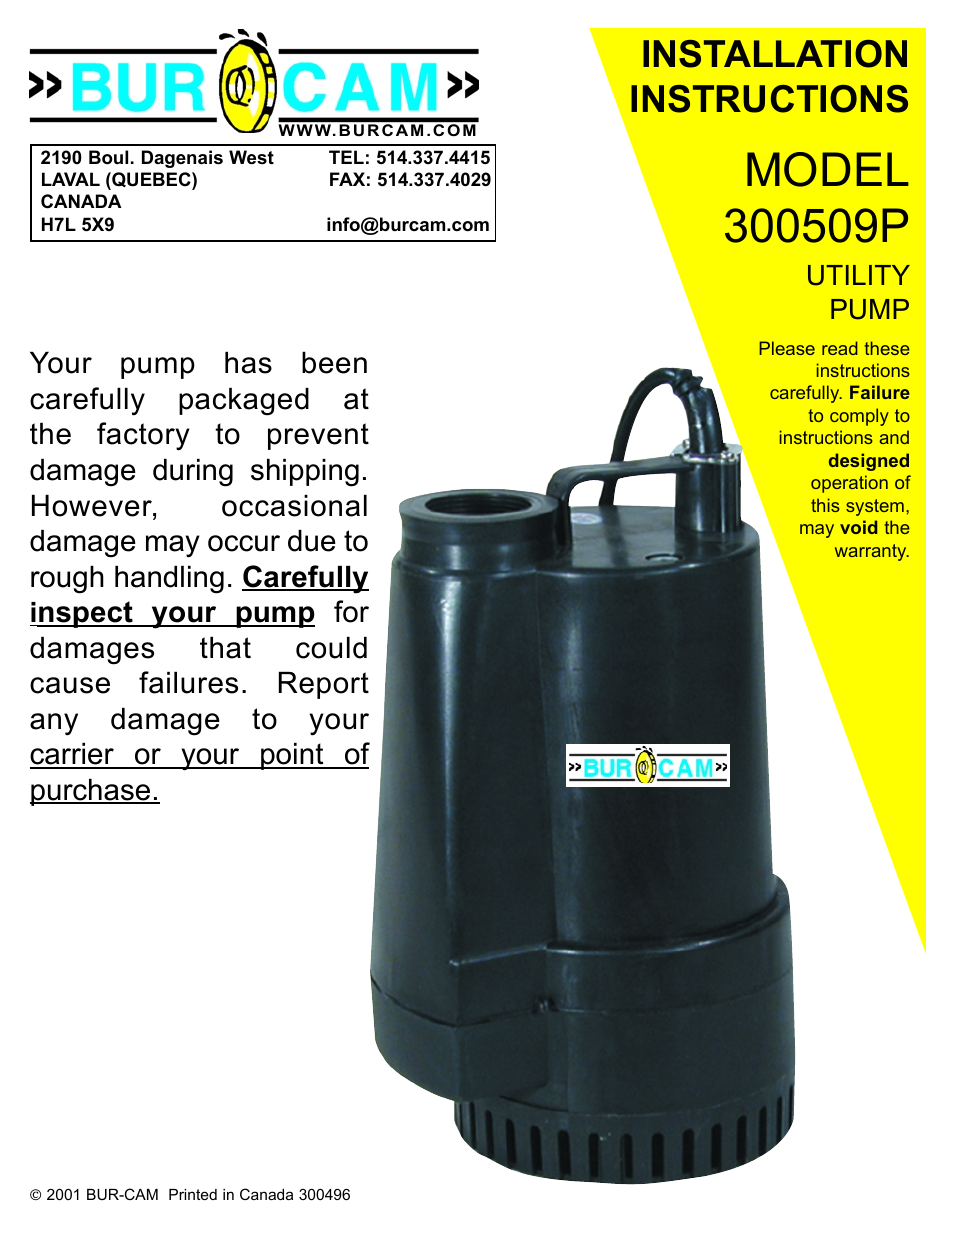 300509P SUBMERSIBLE UTILITY PUMP (POOL/FOUNTAIN) 1/2HP 115V